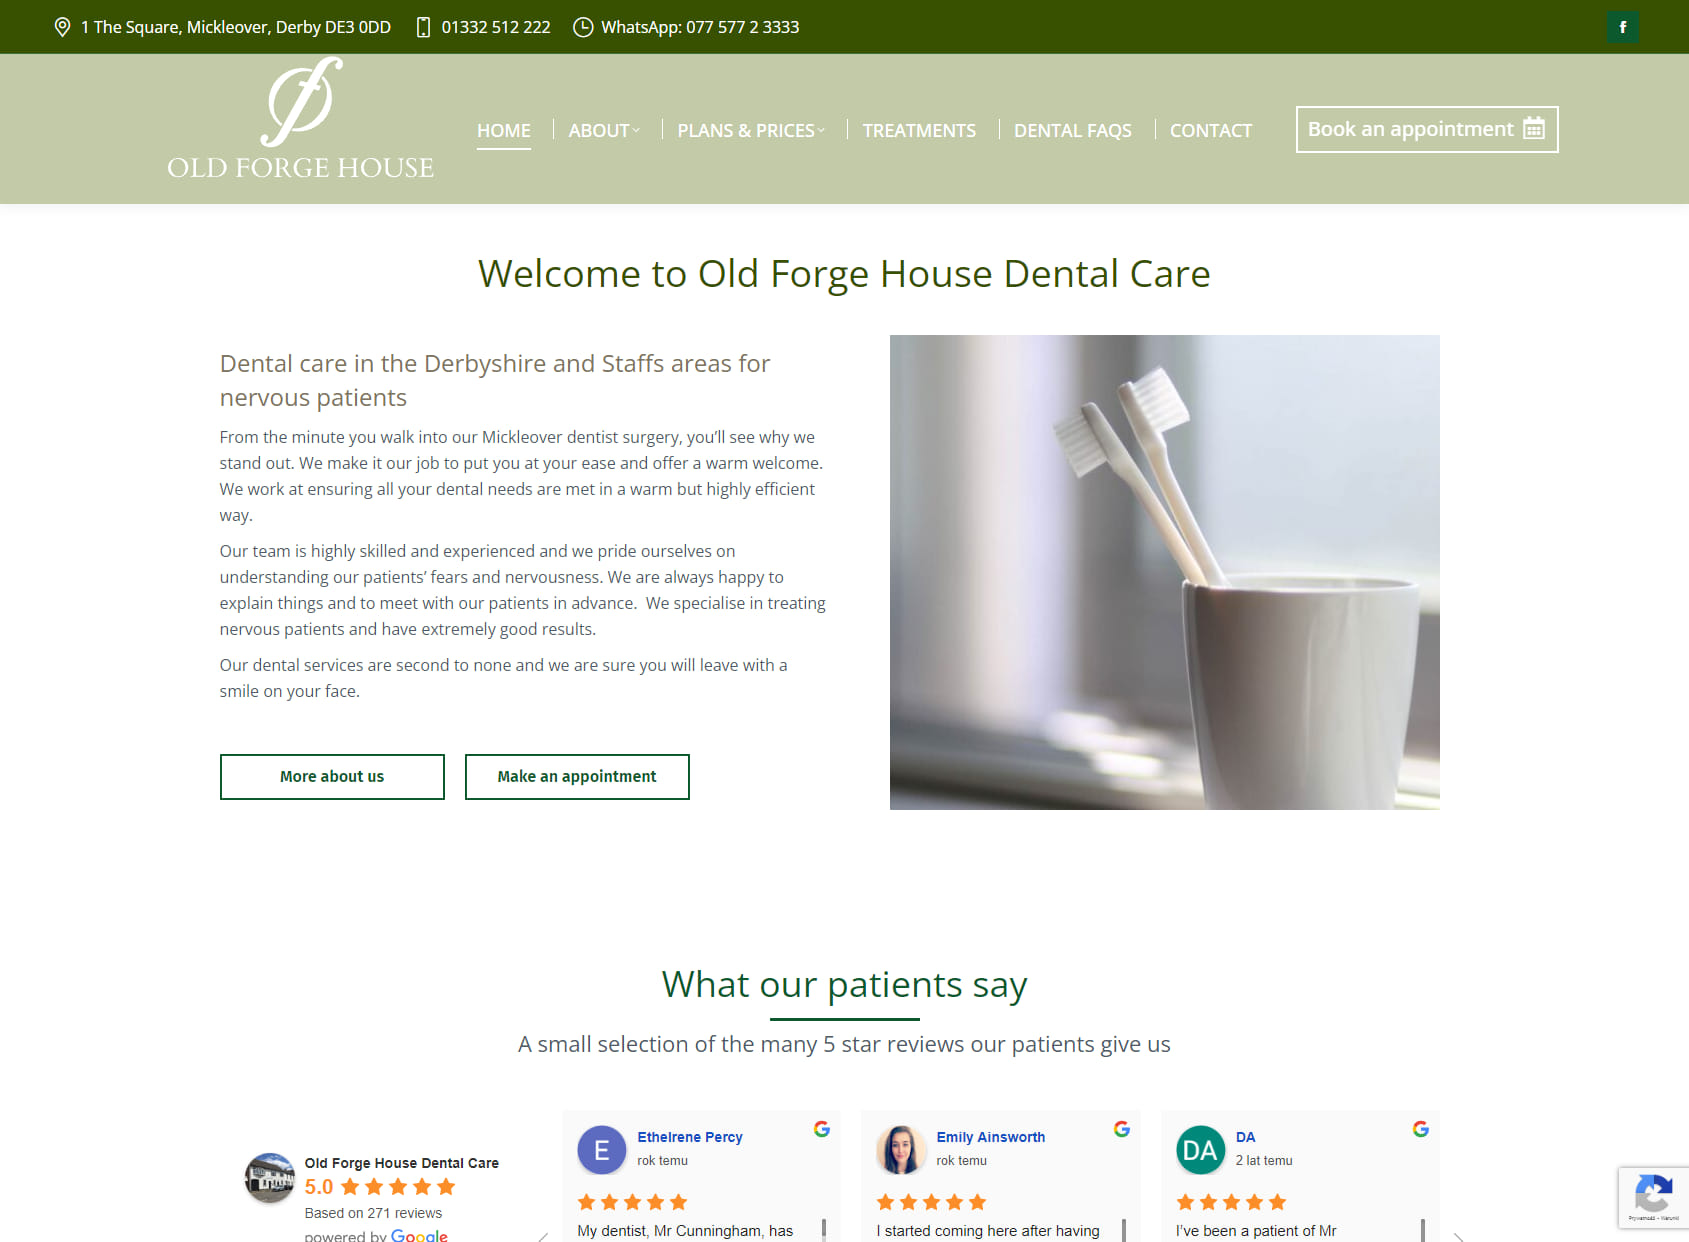 Old Forge House Dental Care